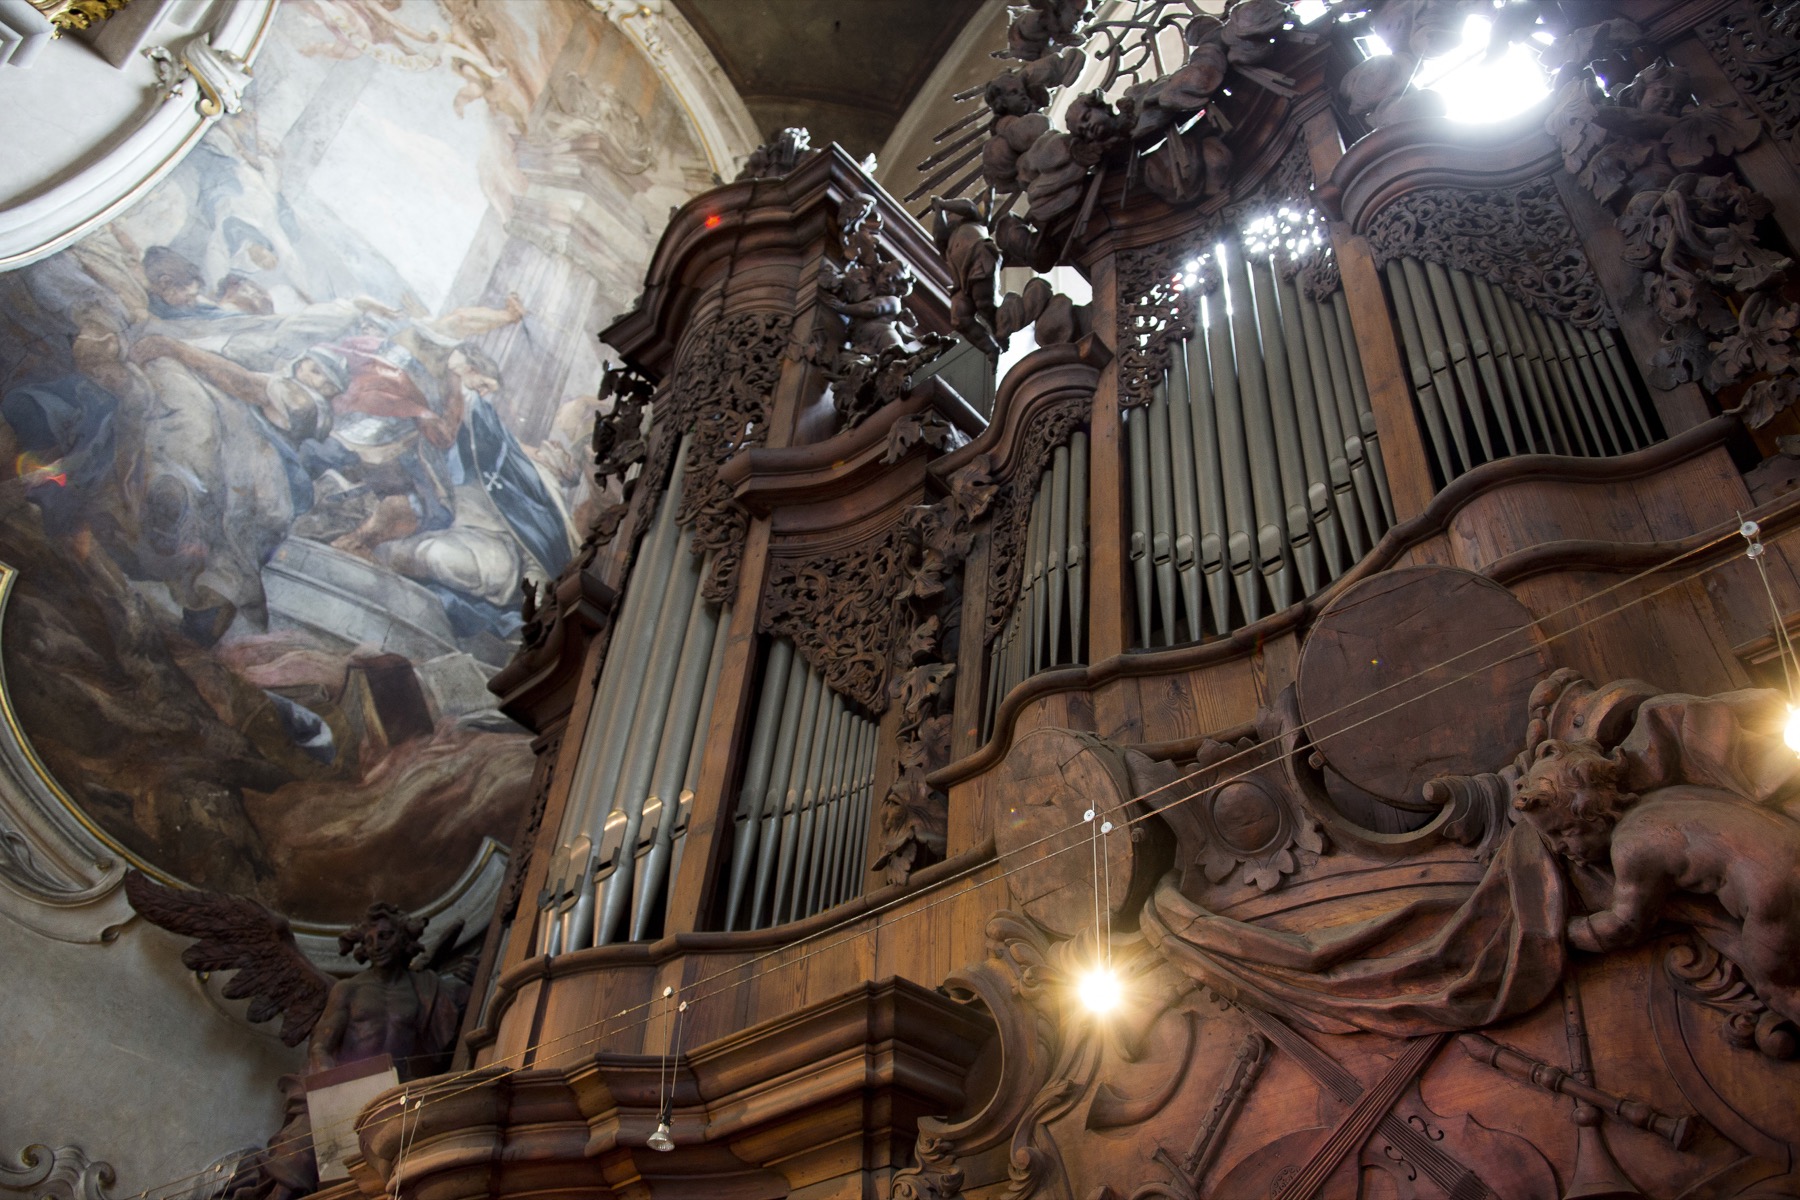 The concert Strings and great organ